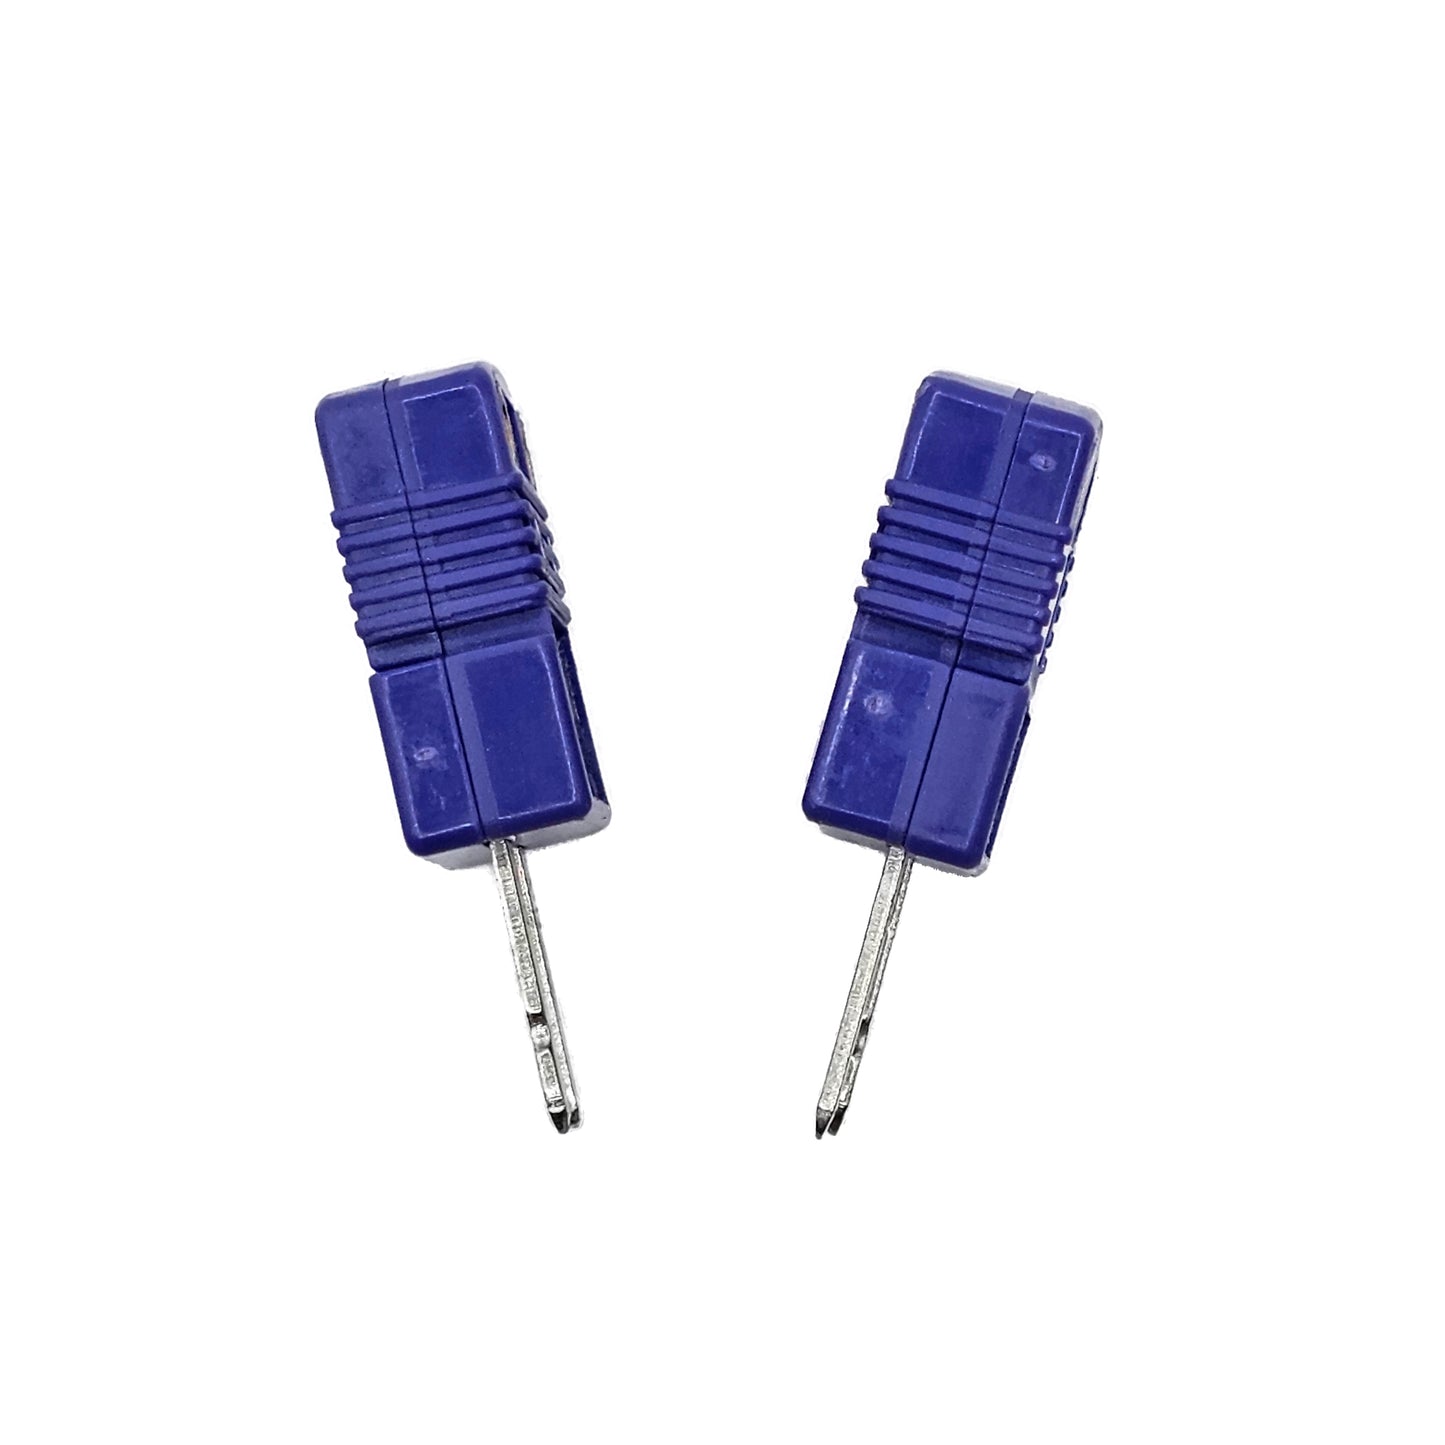 Type E Miniature Thermocouple Connectors, Omega Style - Male, 2-Pack